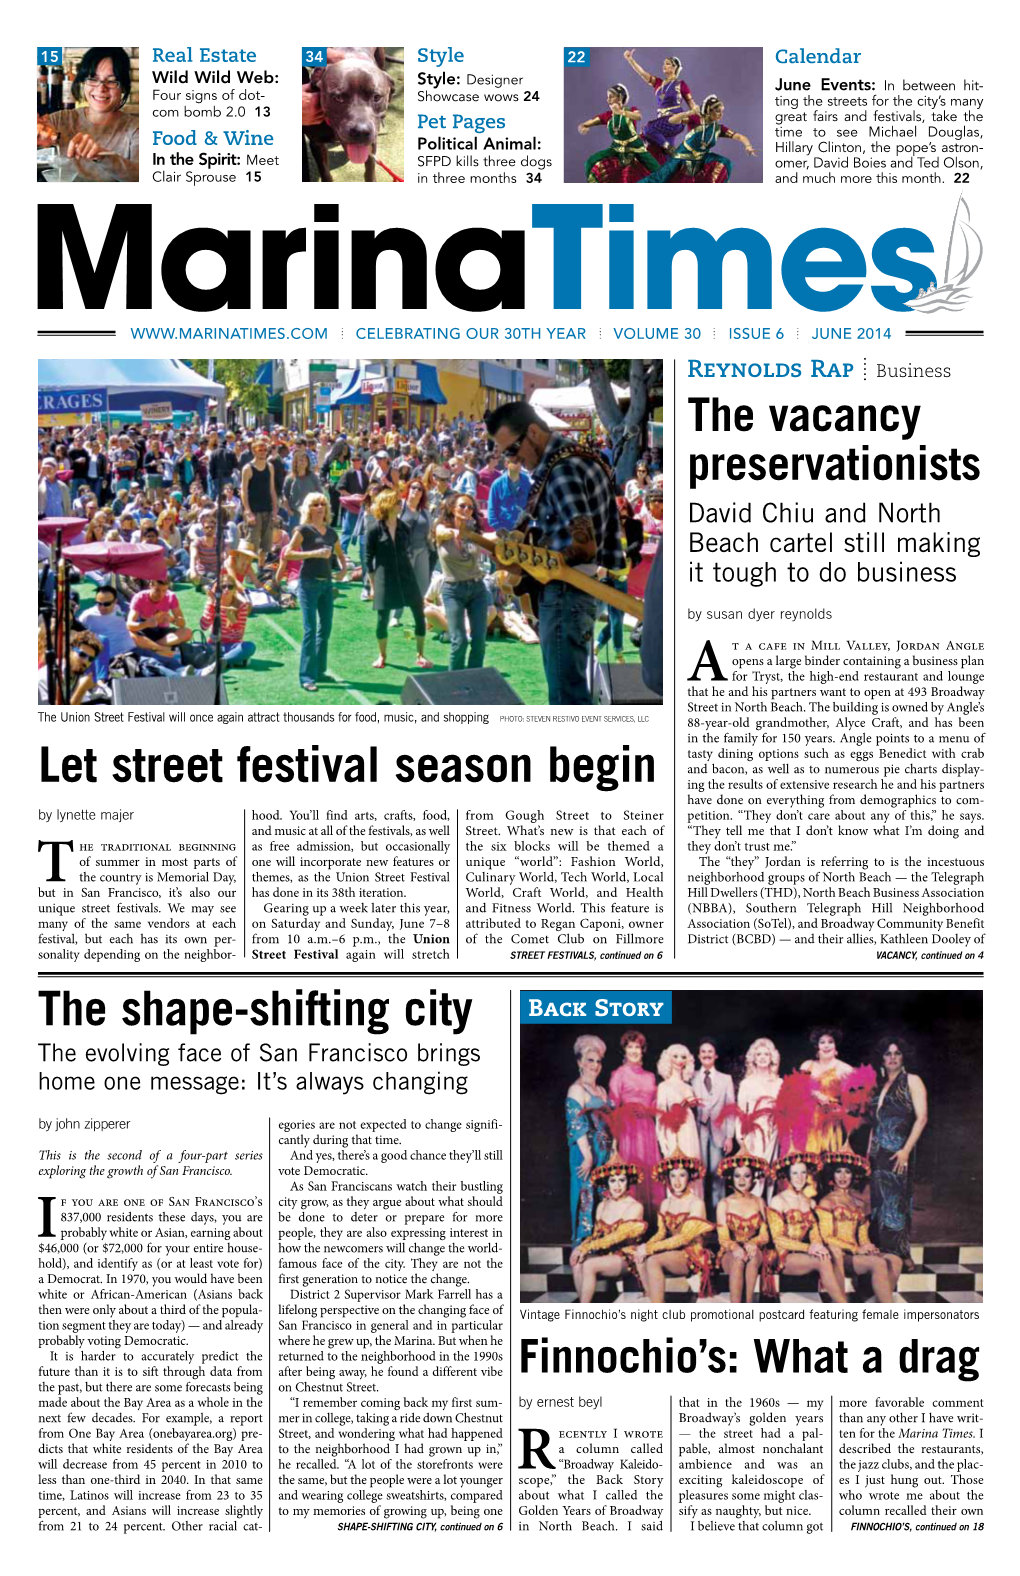 Let Street Festival Season Begin Ing the Results of Extensive Research He and His Partners Have Done on Everything from Demographics to Com- by Lynette Majer Hood